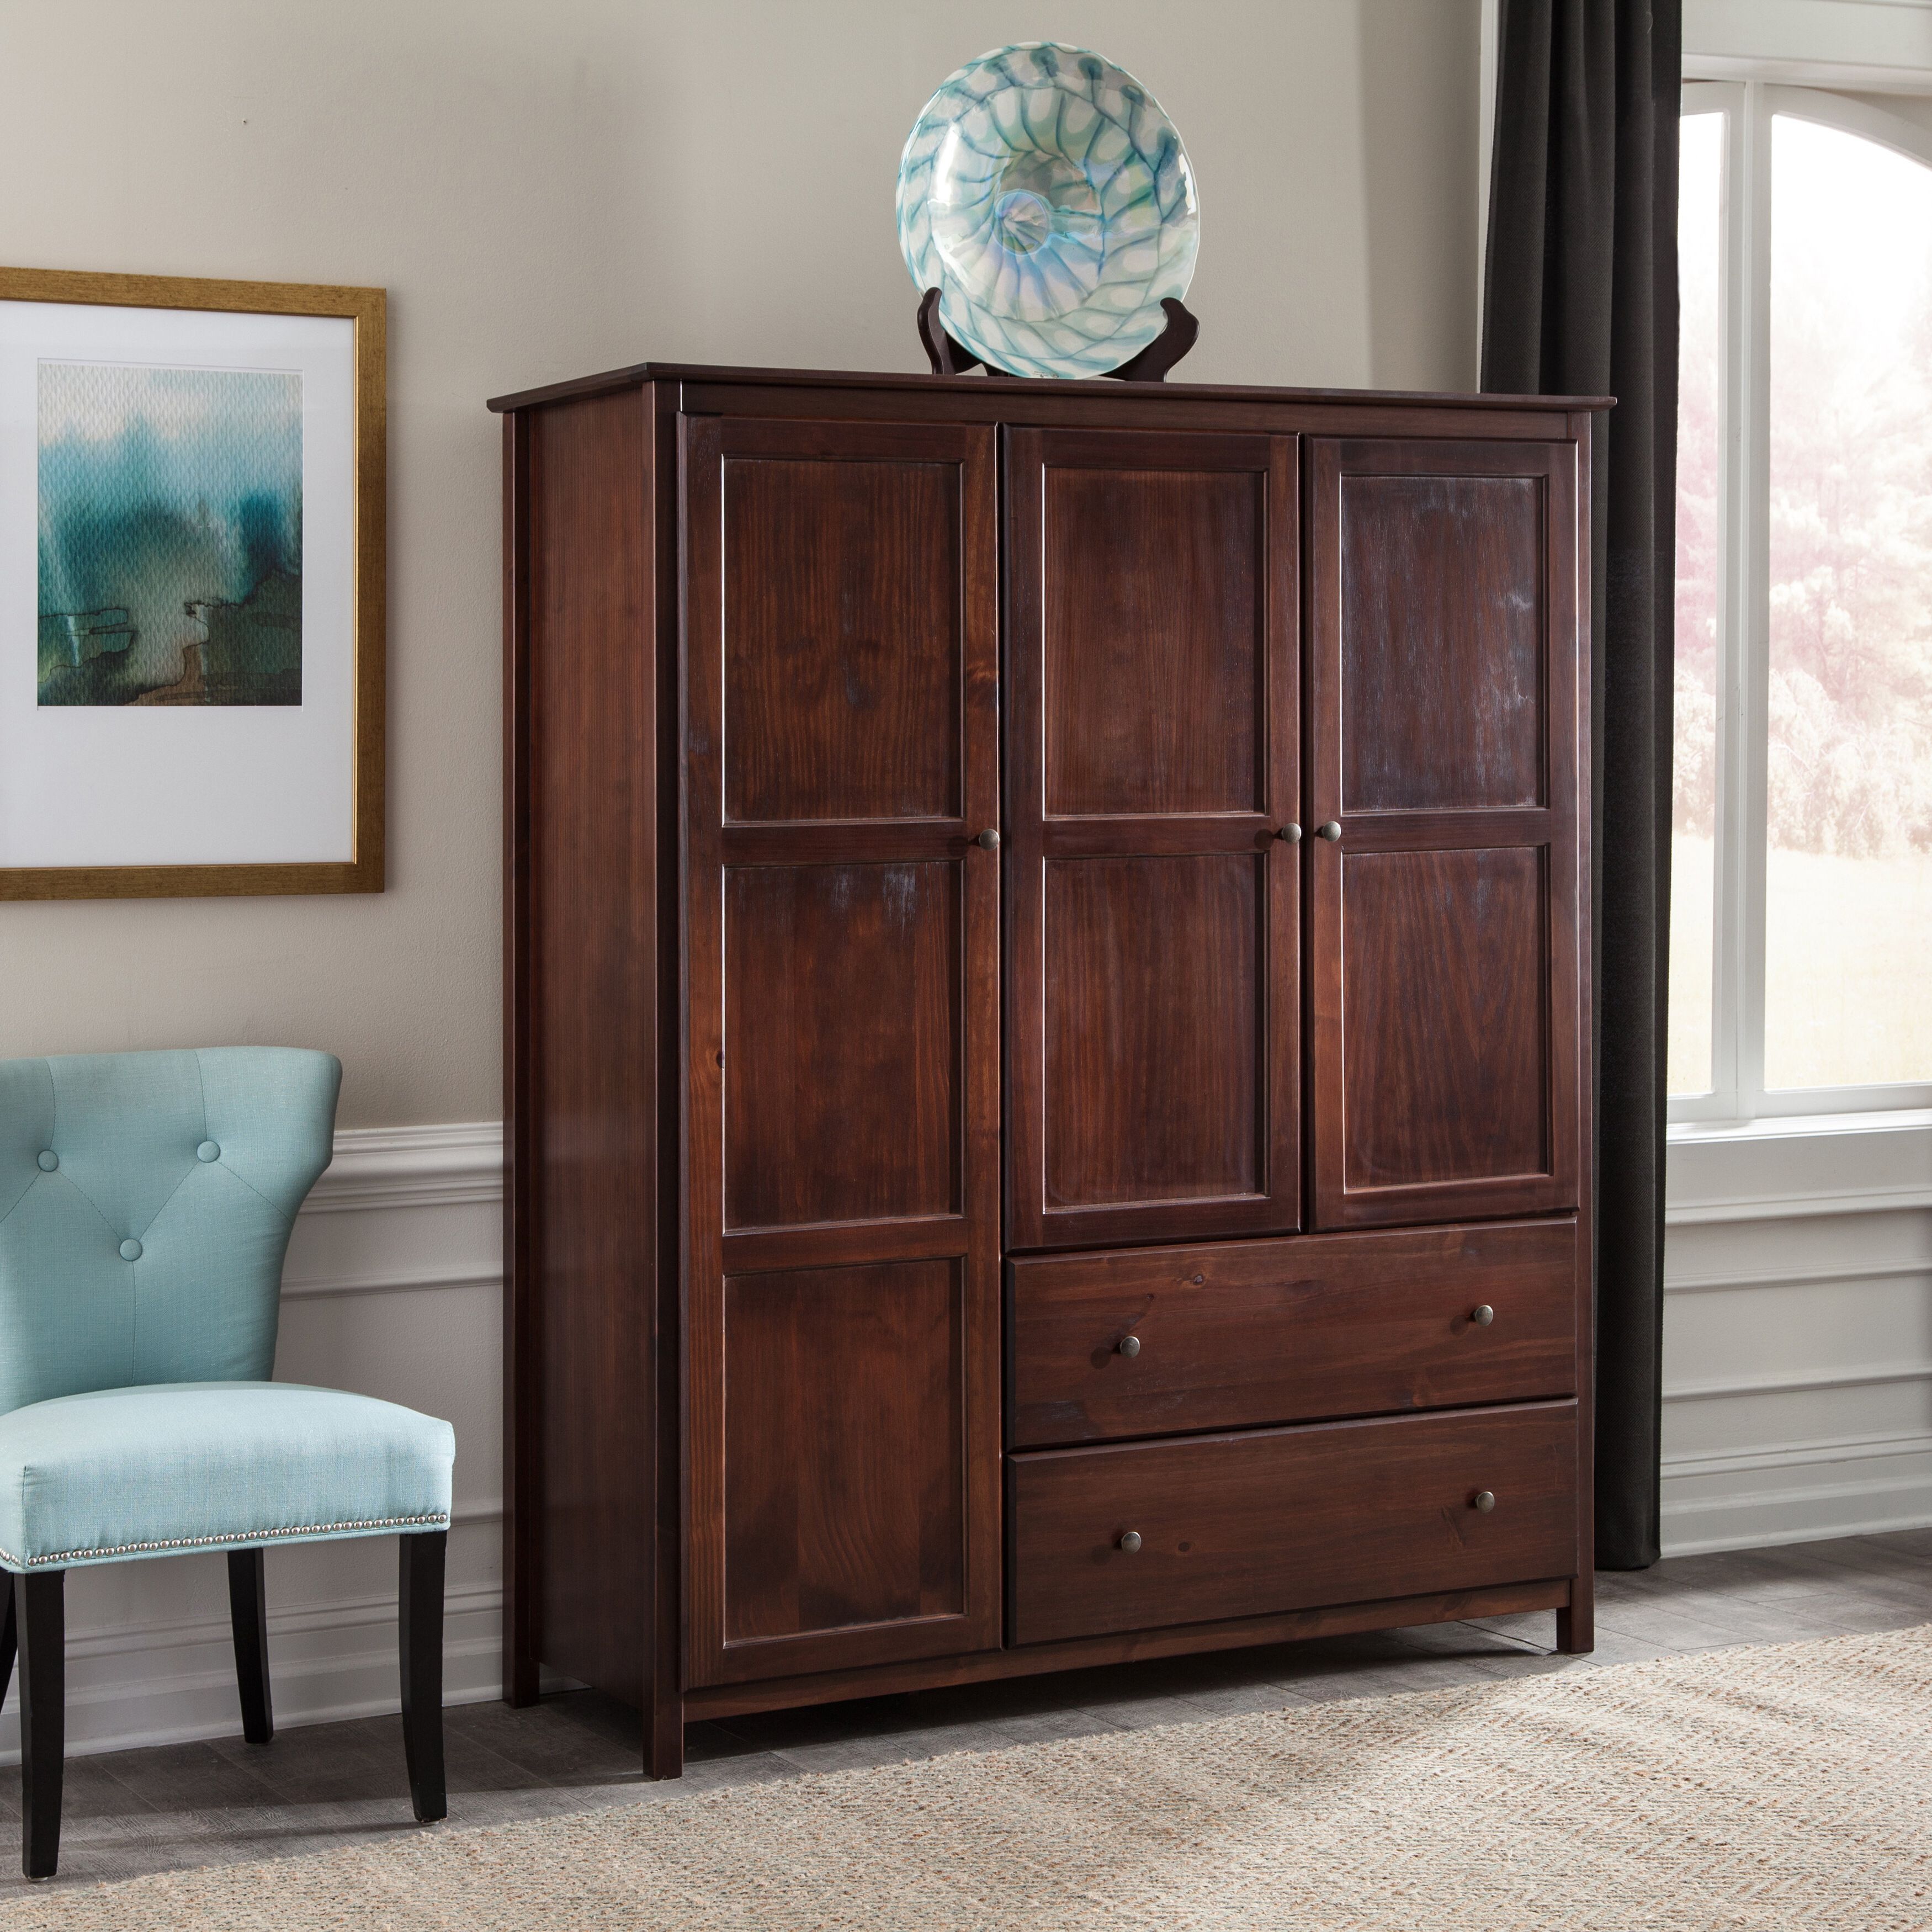 Grain Wood Furniture Shaker Solid Wood Armoire & Reviews | Wayfair With Wardrobes In Cherry (Gallery 16 of 20)